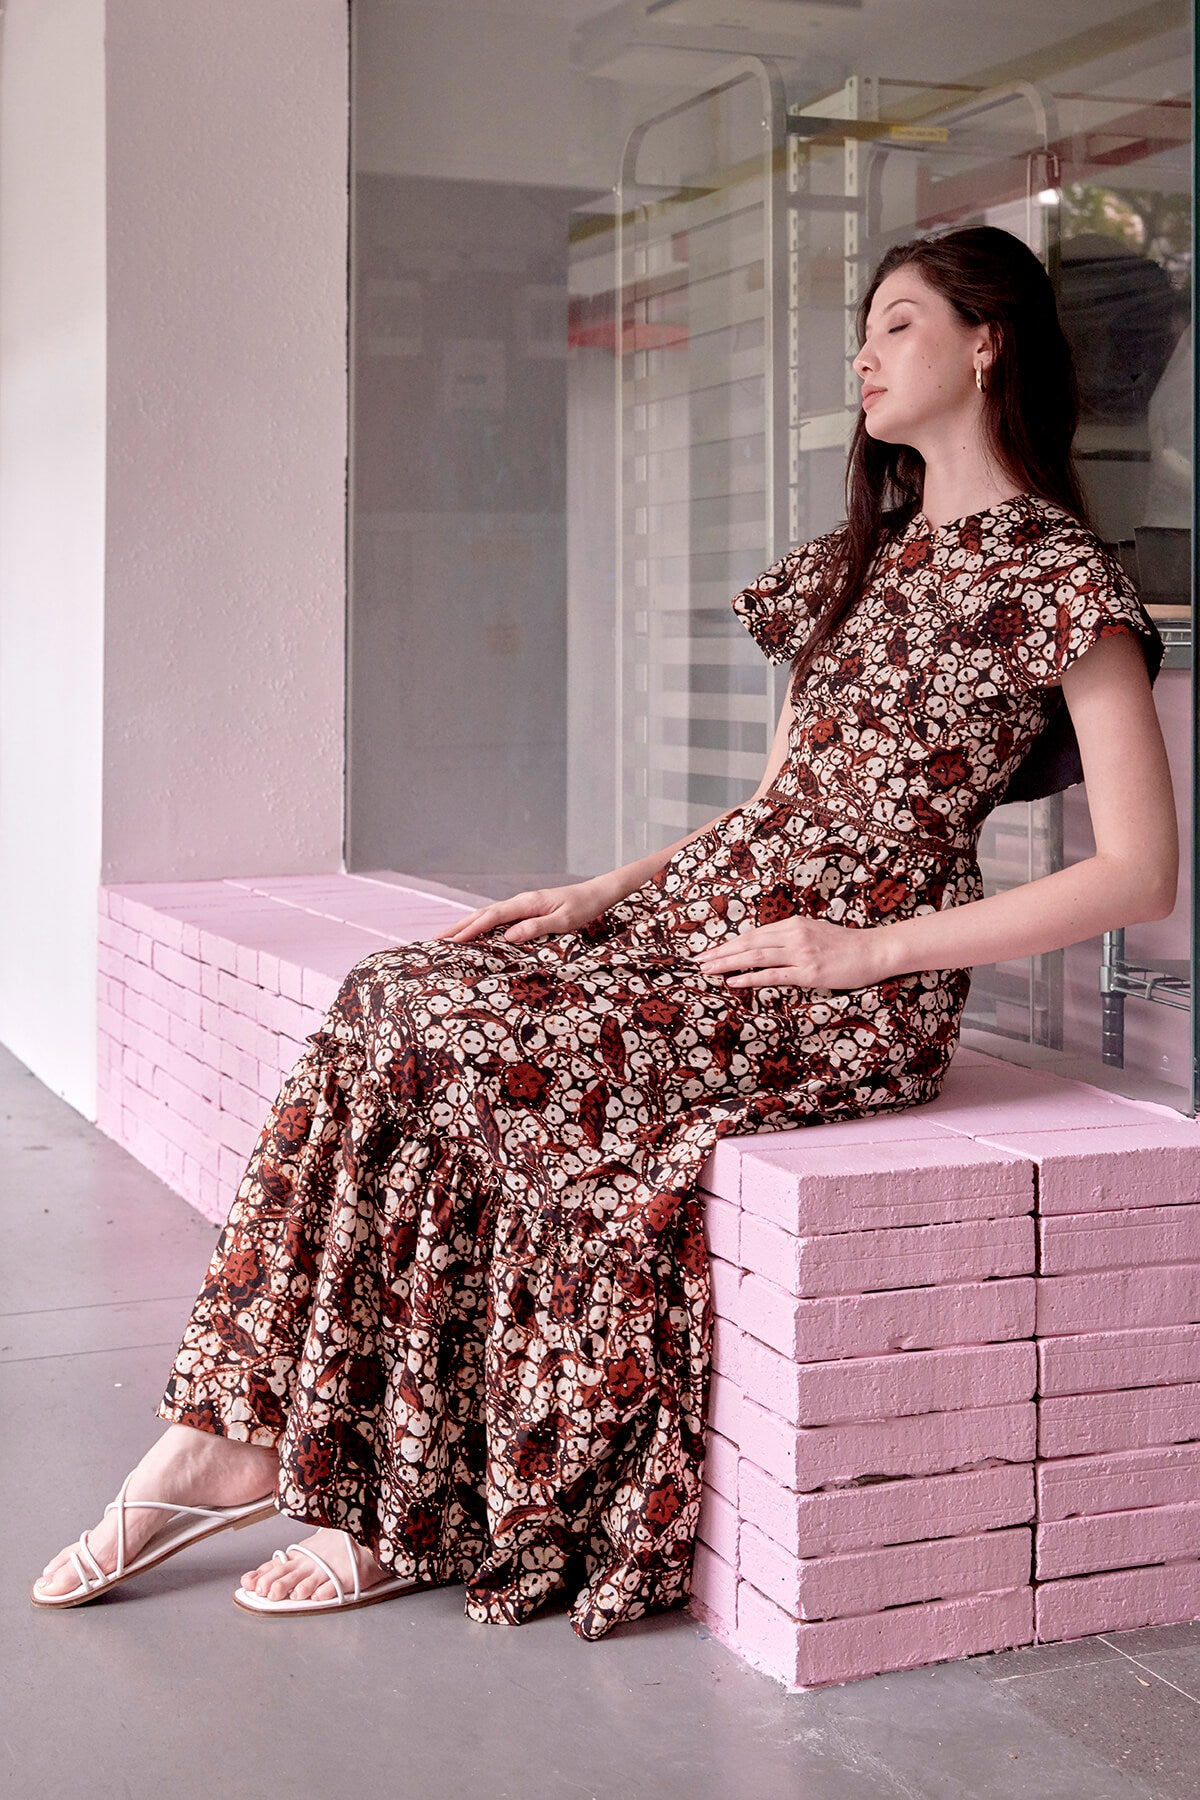 Side view of long haired eurasian model, seated on a pink ledge, wearing maxi length brown batik dress with cape sleeves. Fabric of dress is wax resist cotton also known as batik